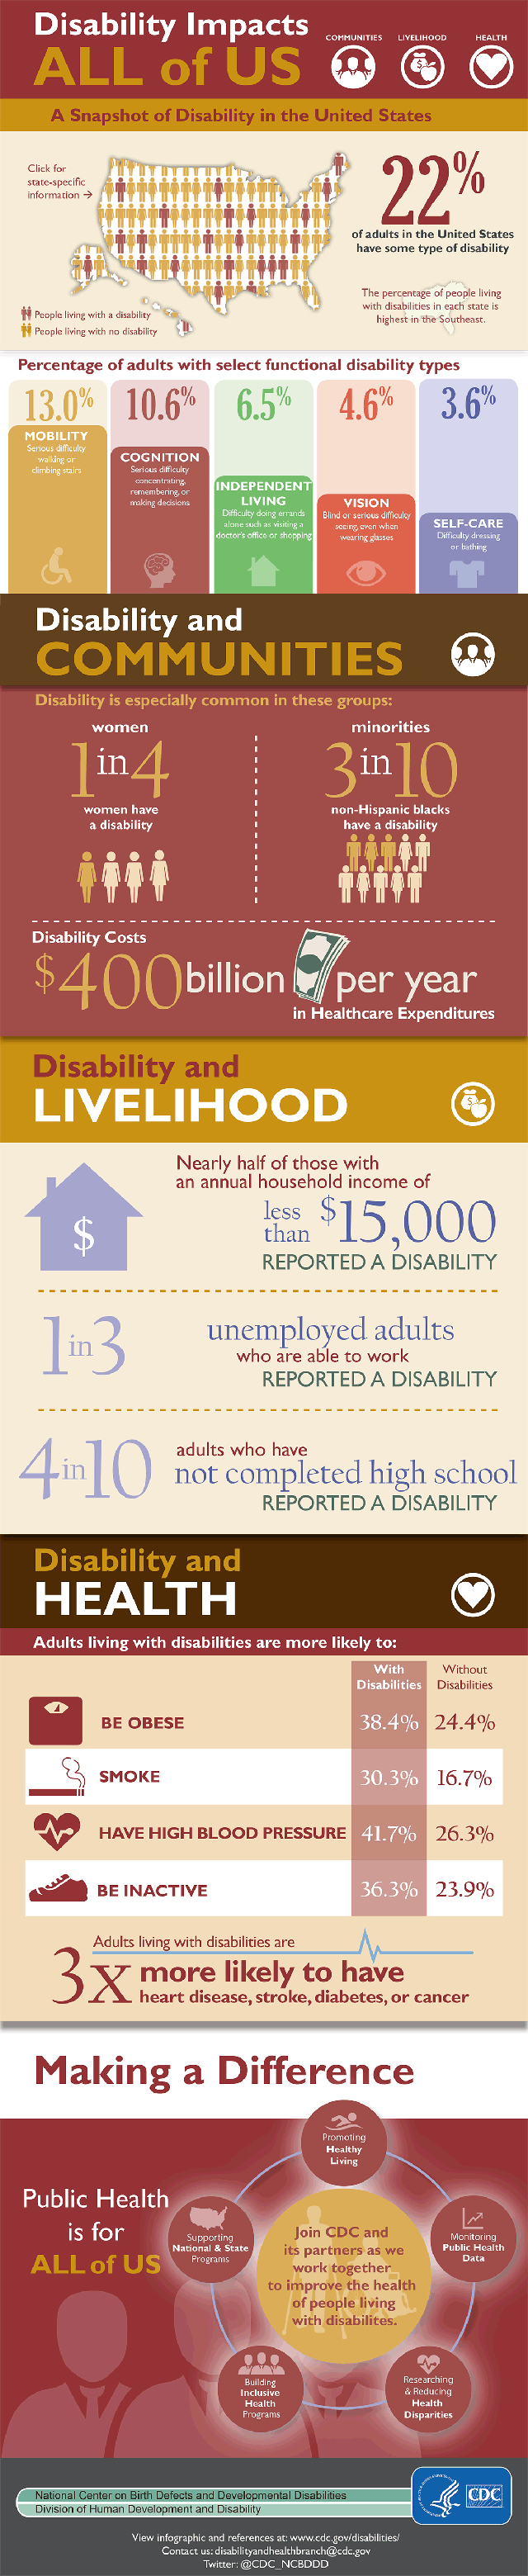 Disability Impacts All of Us